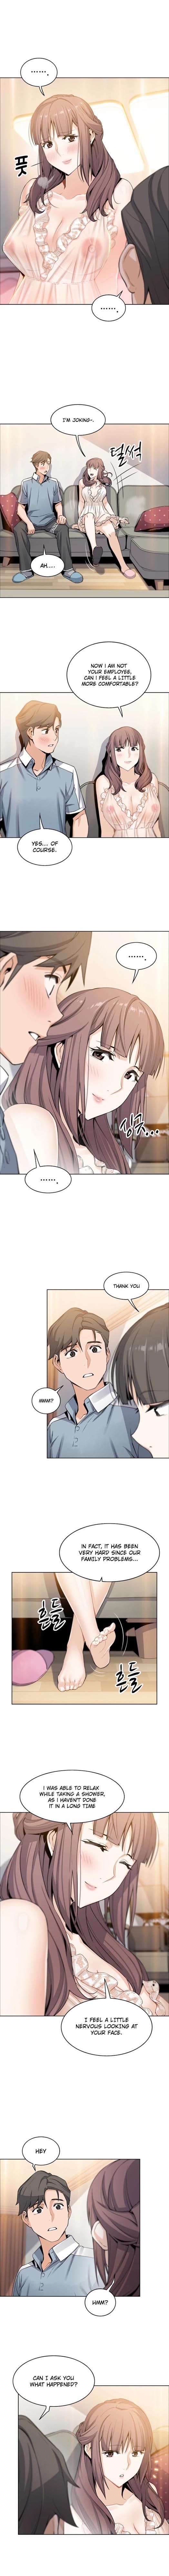 Housekeeper [Neck Pillow, Paper] Ch.49/49 [English] [Manhwa PDF] Completed 109